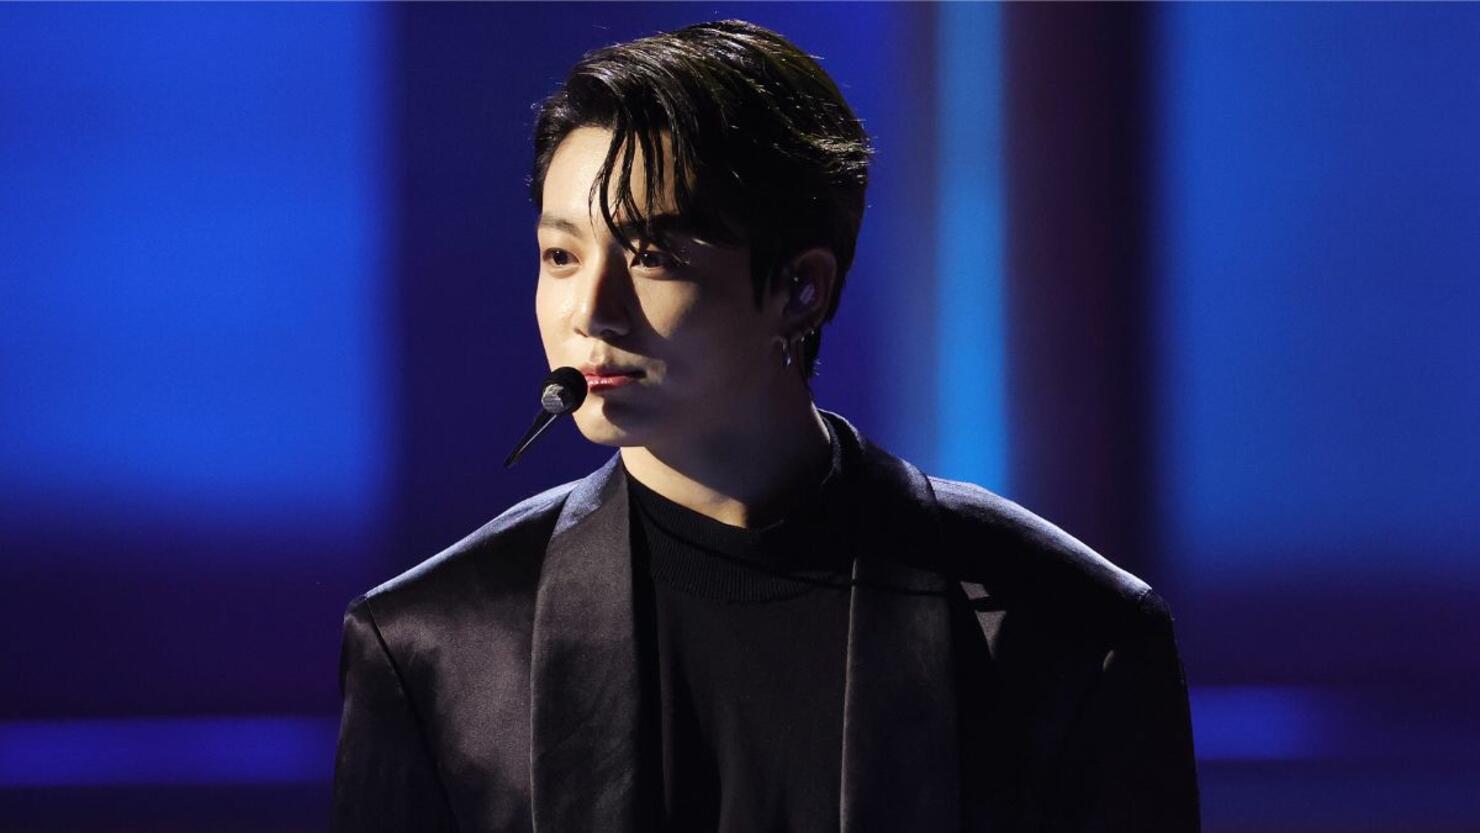 BTS' Jungkook announces details of first solo live show